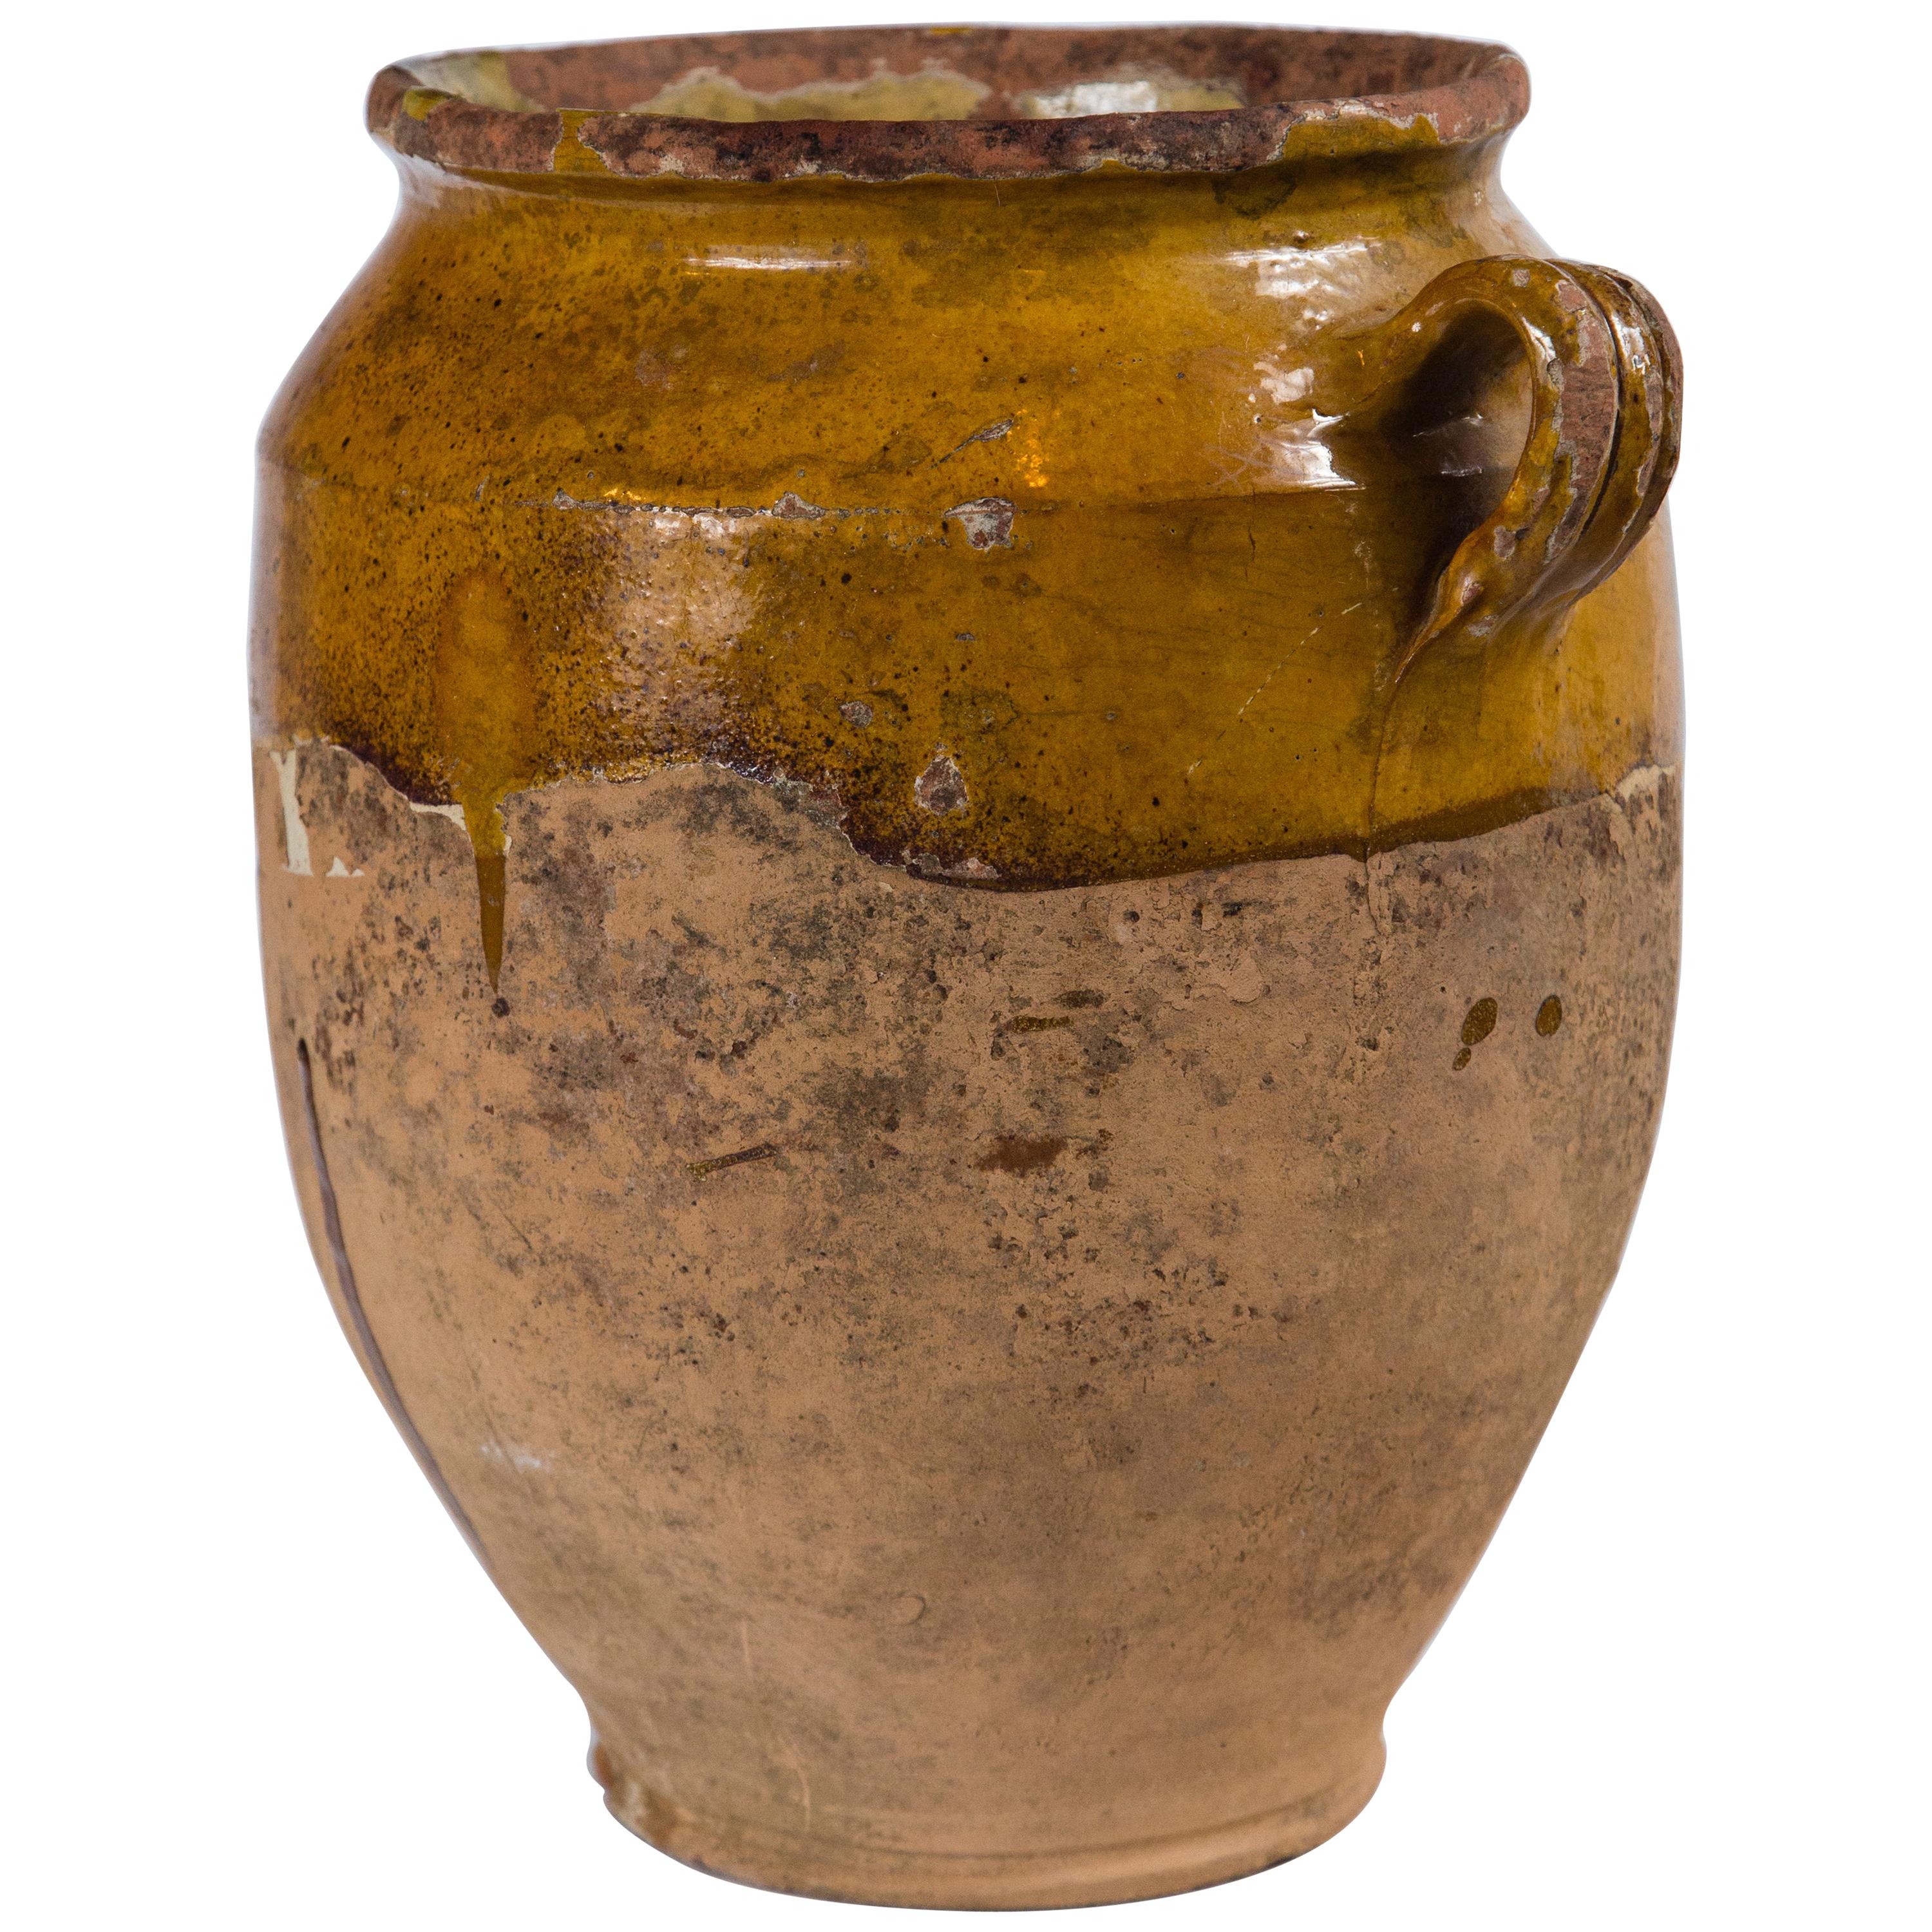 Antique French confit pot, late 19th century. Aged terracotta with yellow glaze. Confit pots were used for food preservation. The bottom half was left unglazed to allow the pot to keep cool while half buried in the ground.